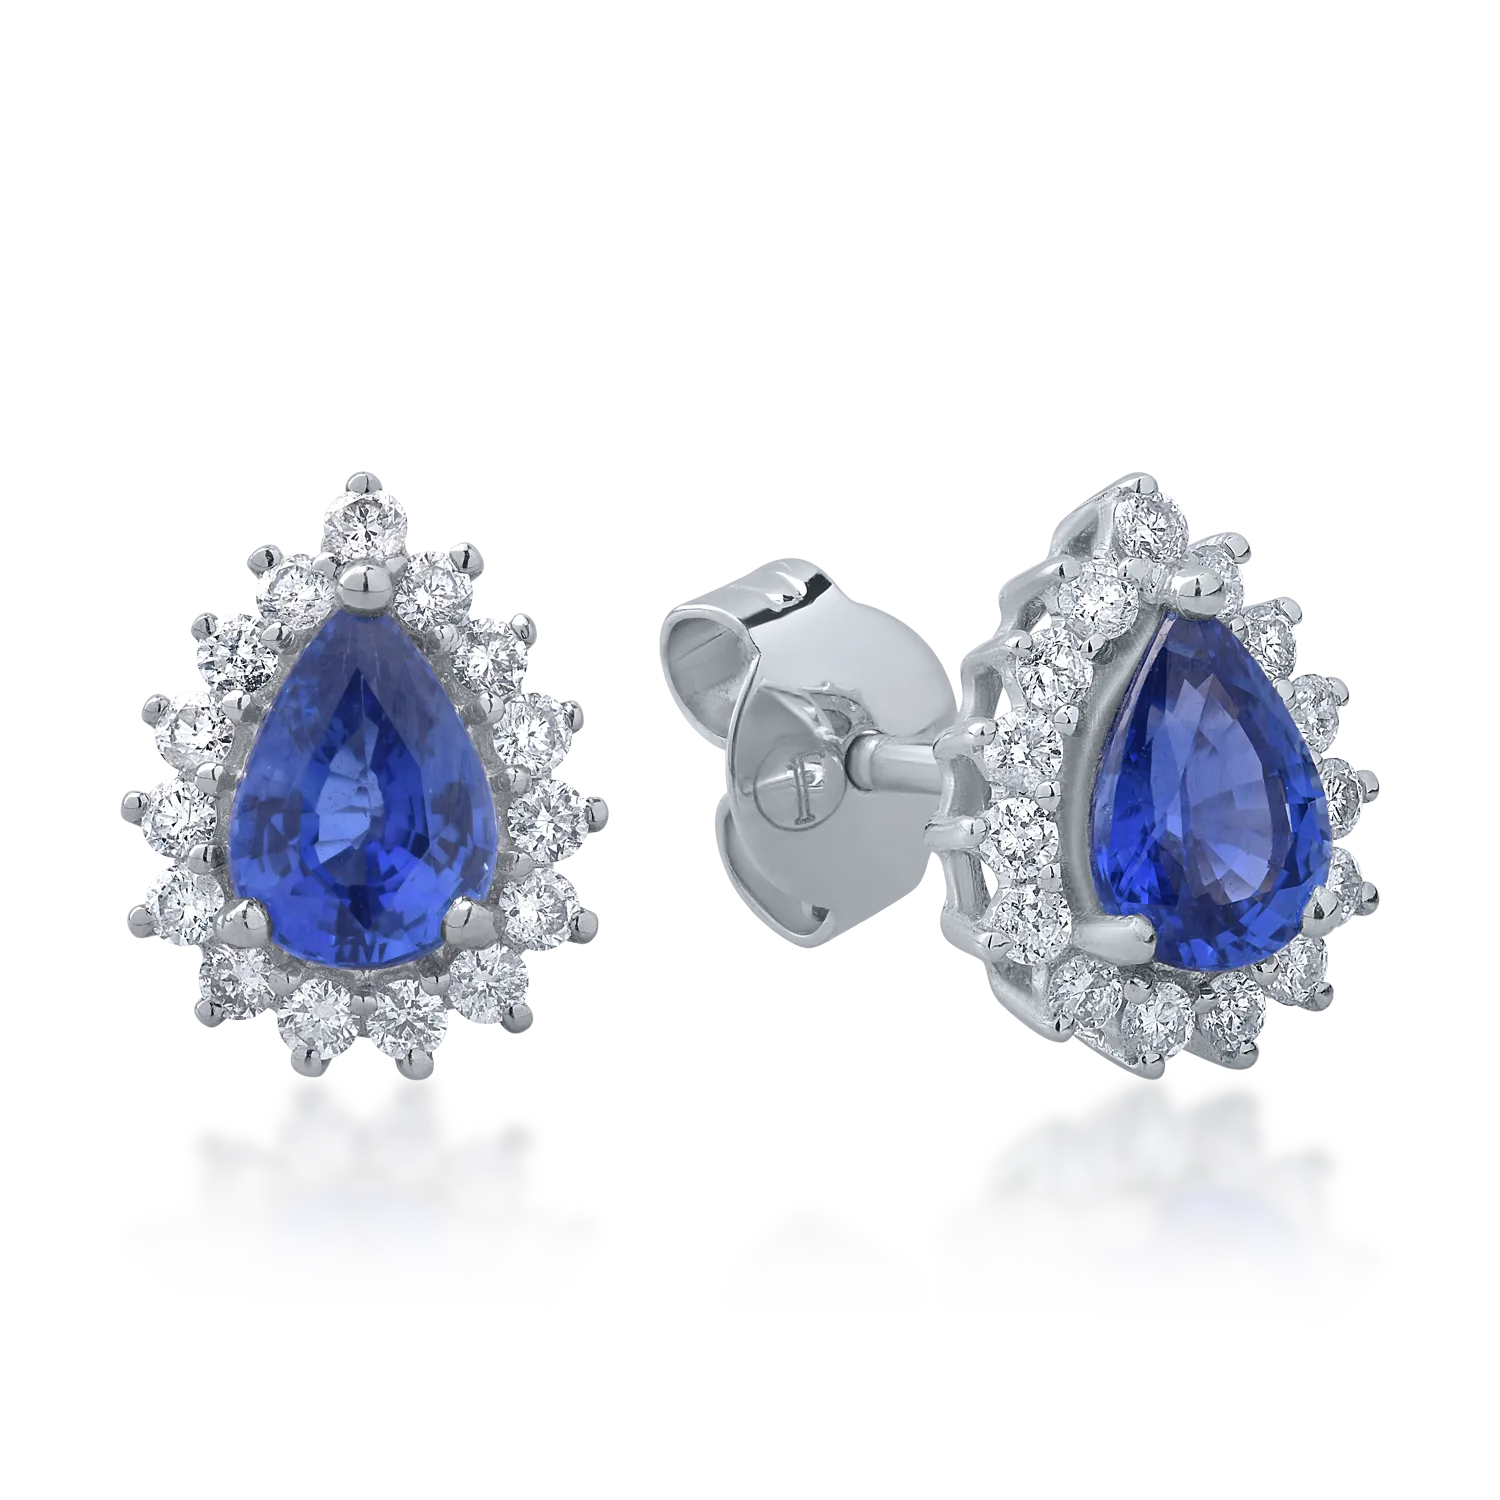 18K white gold earrings with 1.78ct sapphires and 0.44ct diamonds